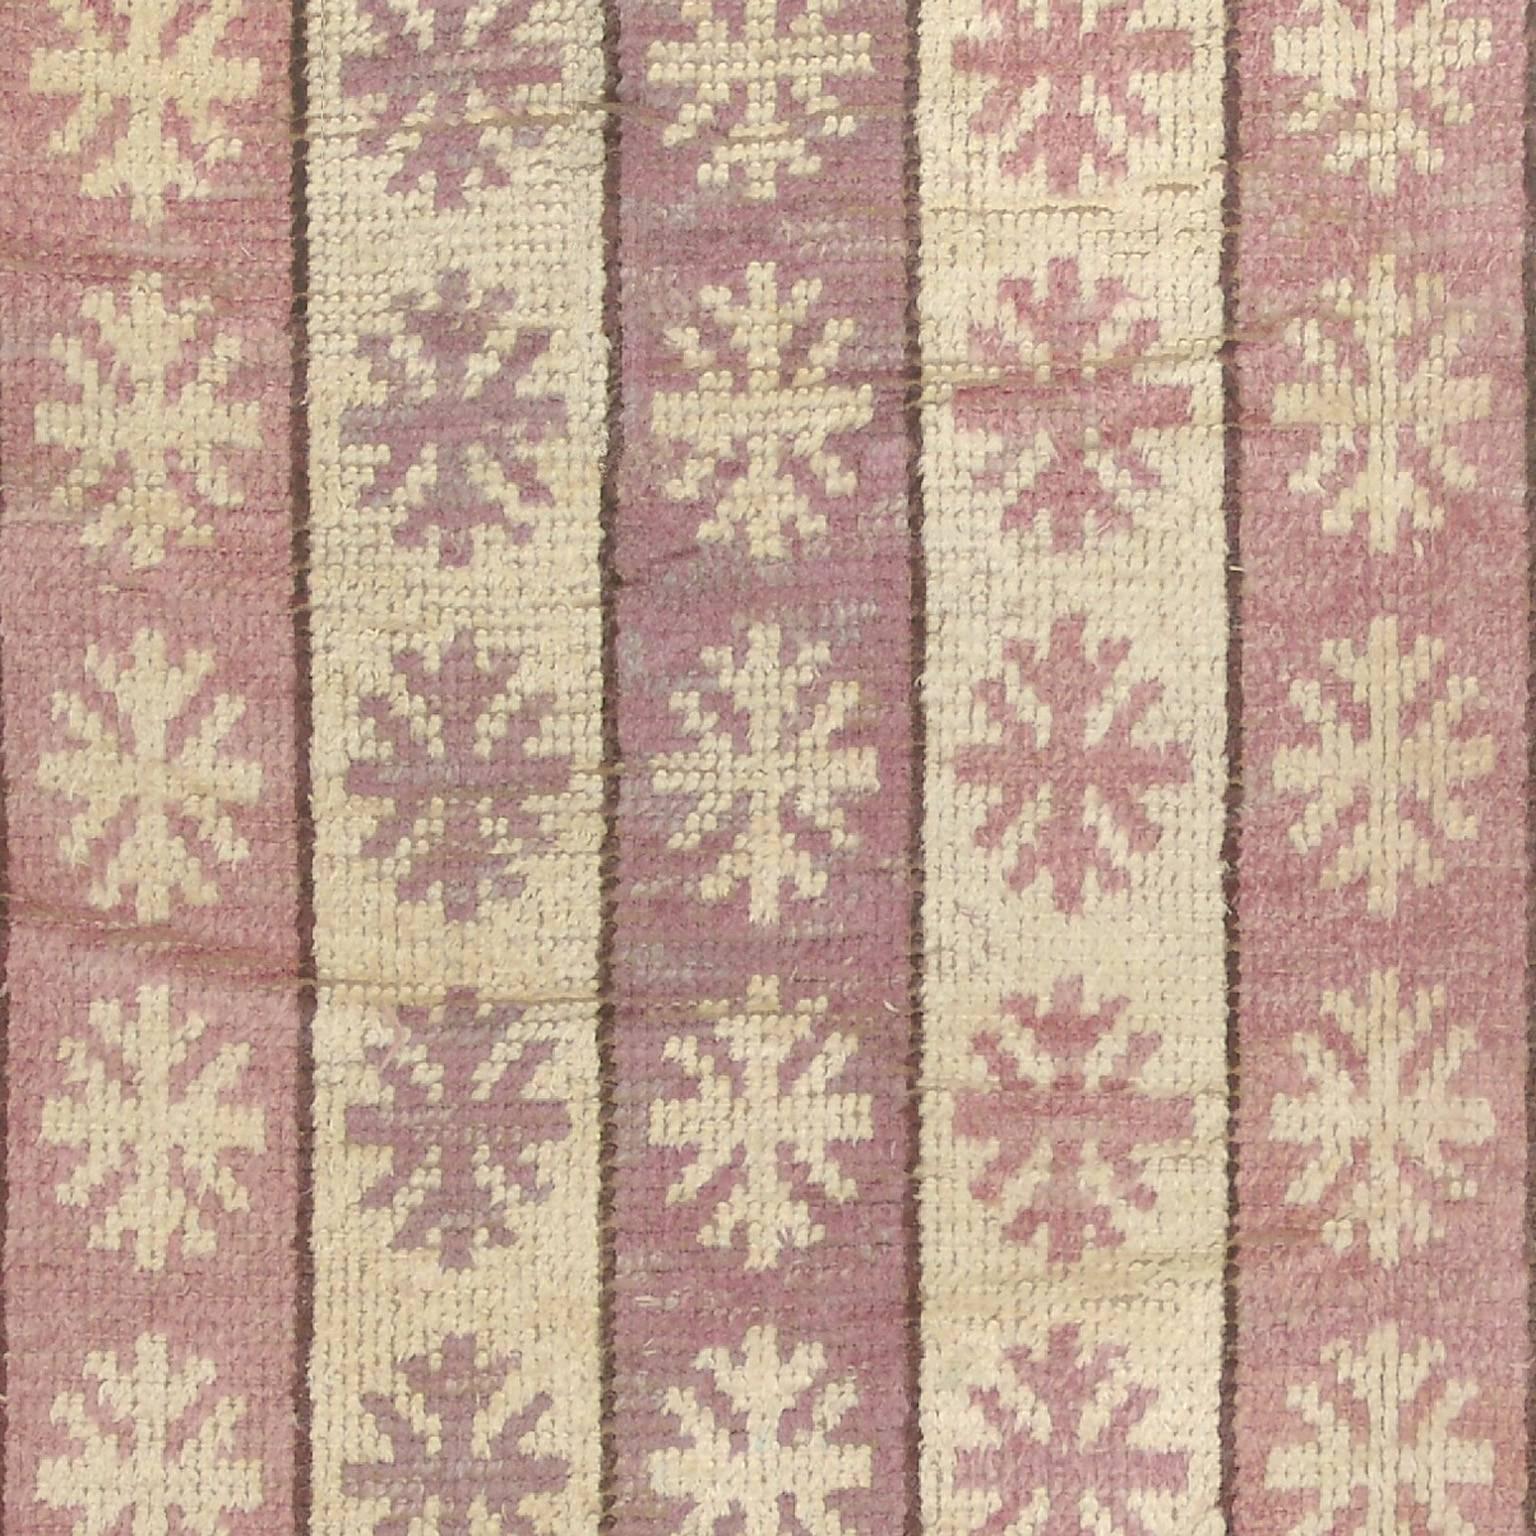 Hand-Woven Mid-20th Century Swedish Pile Carpet by Märta Måås-Fjetterström For Sale